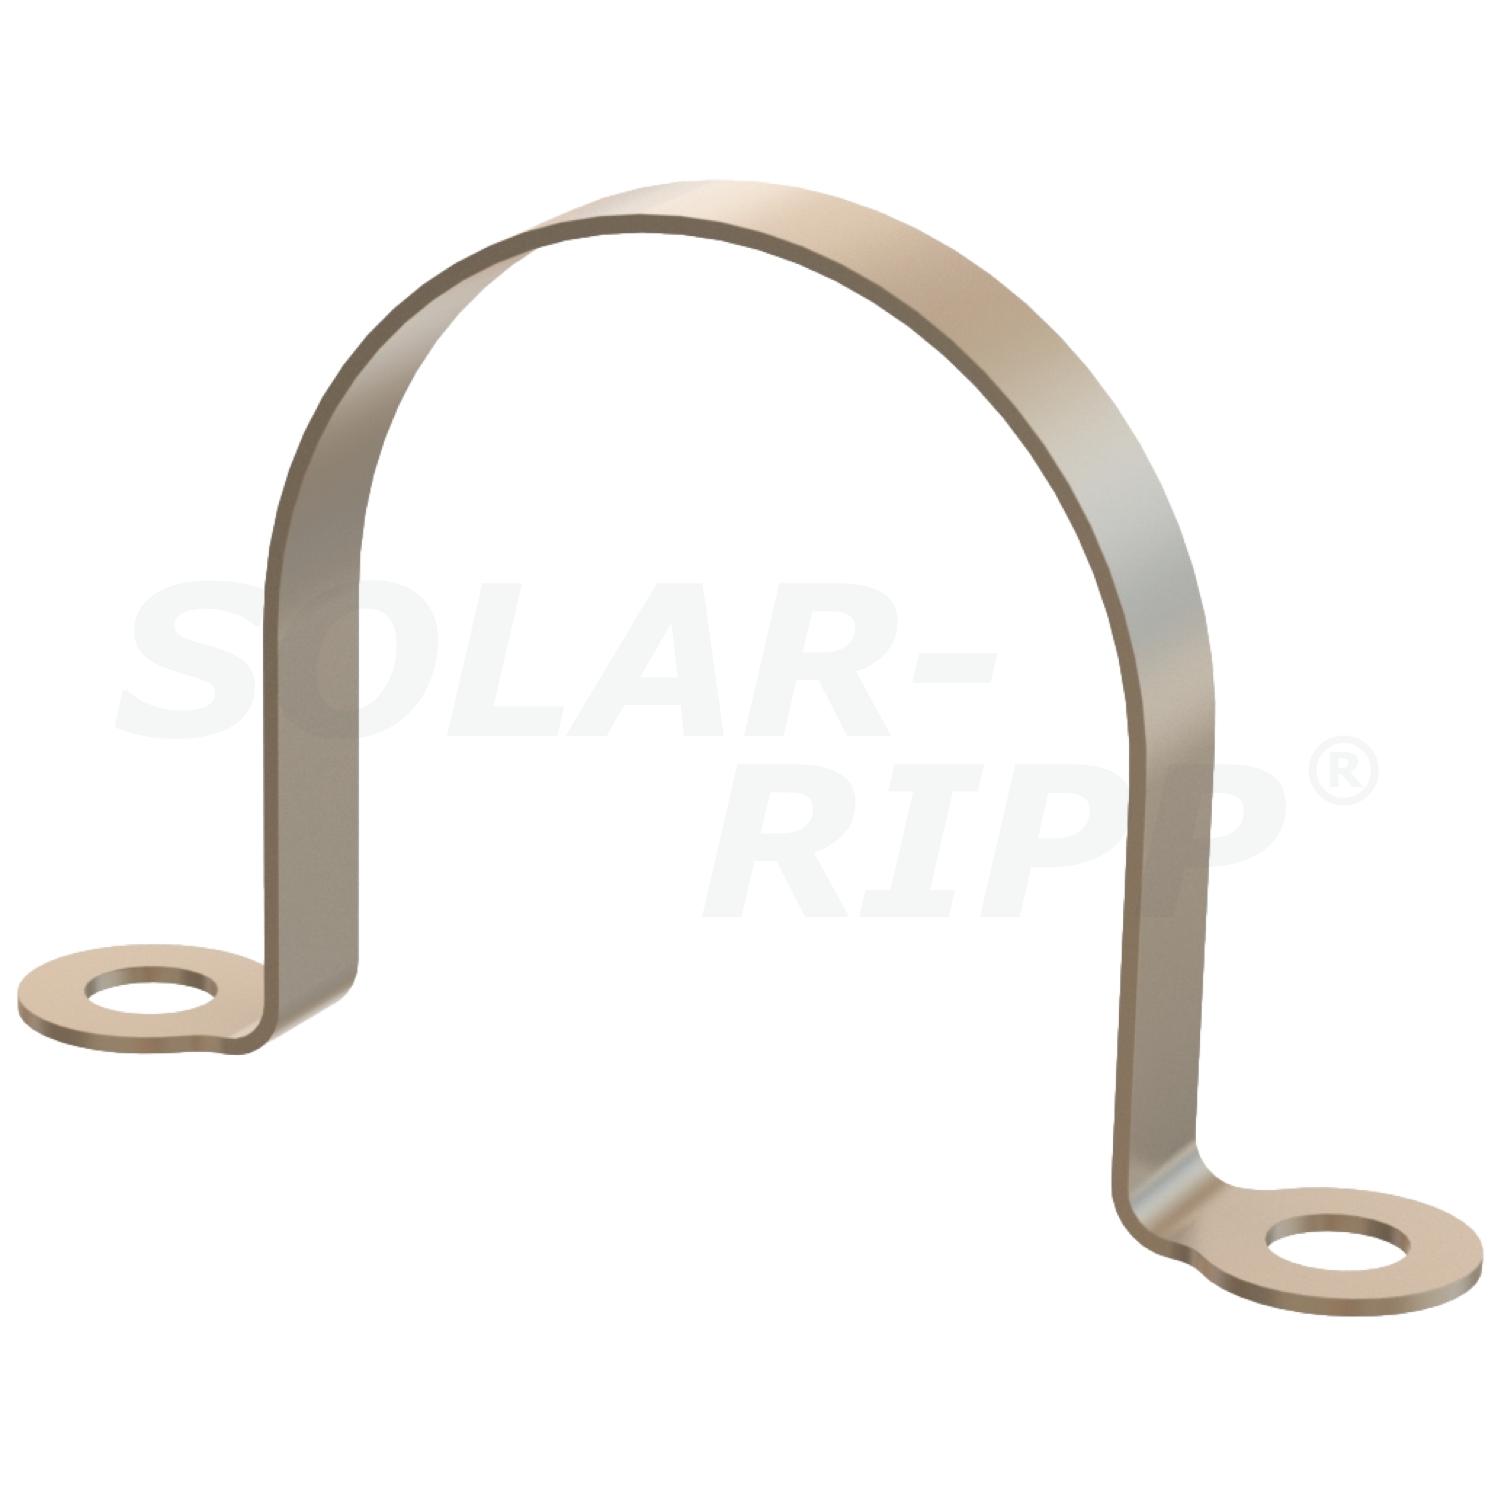 Clamp for SOLAR-RIPP ® distributor/collector with 50mm diameter